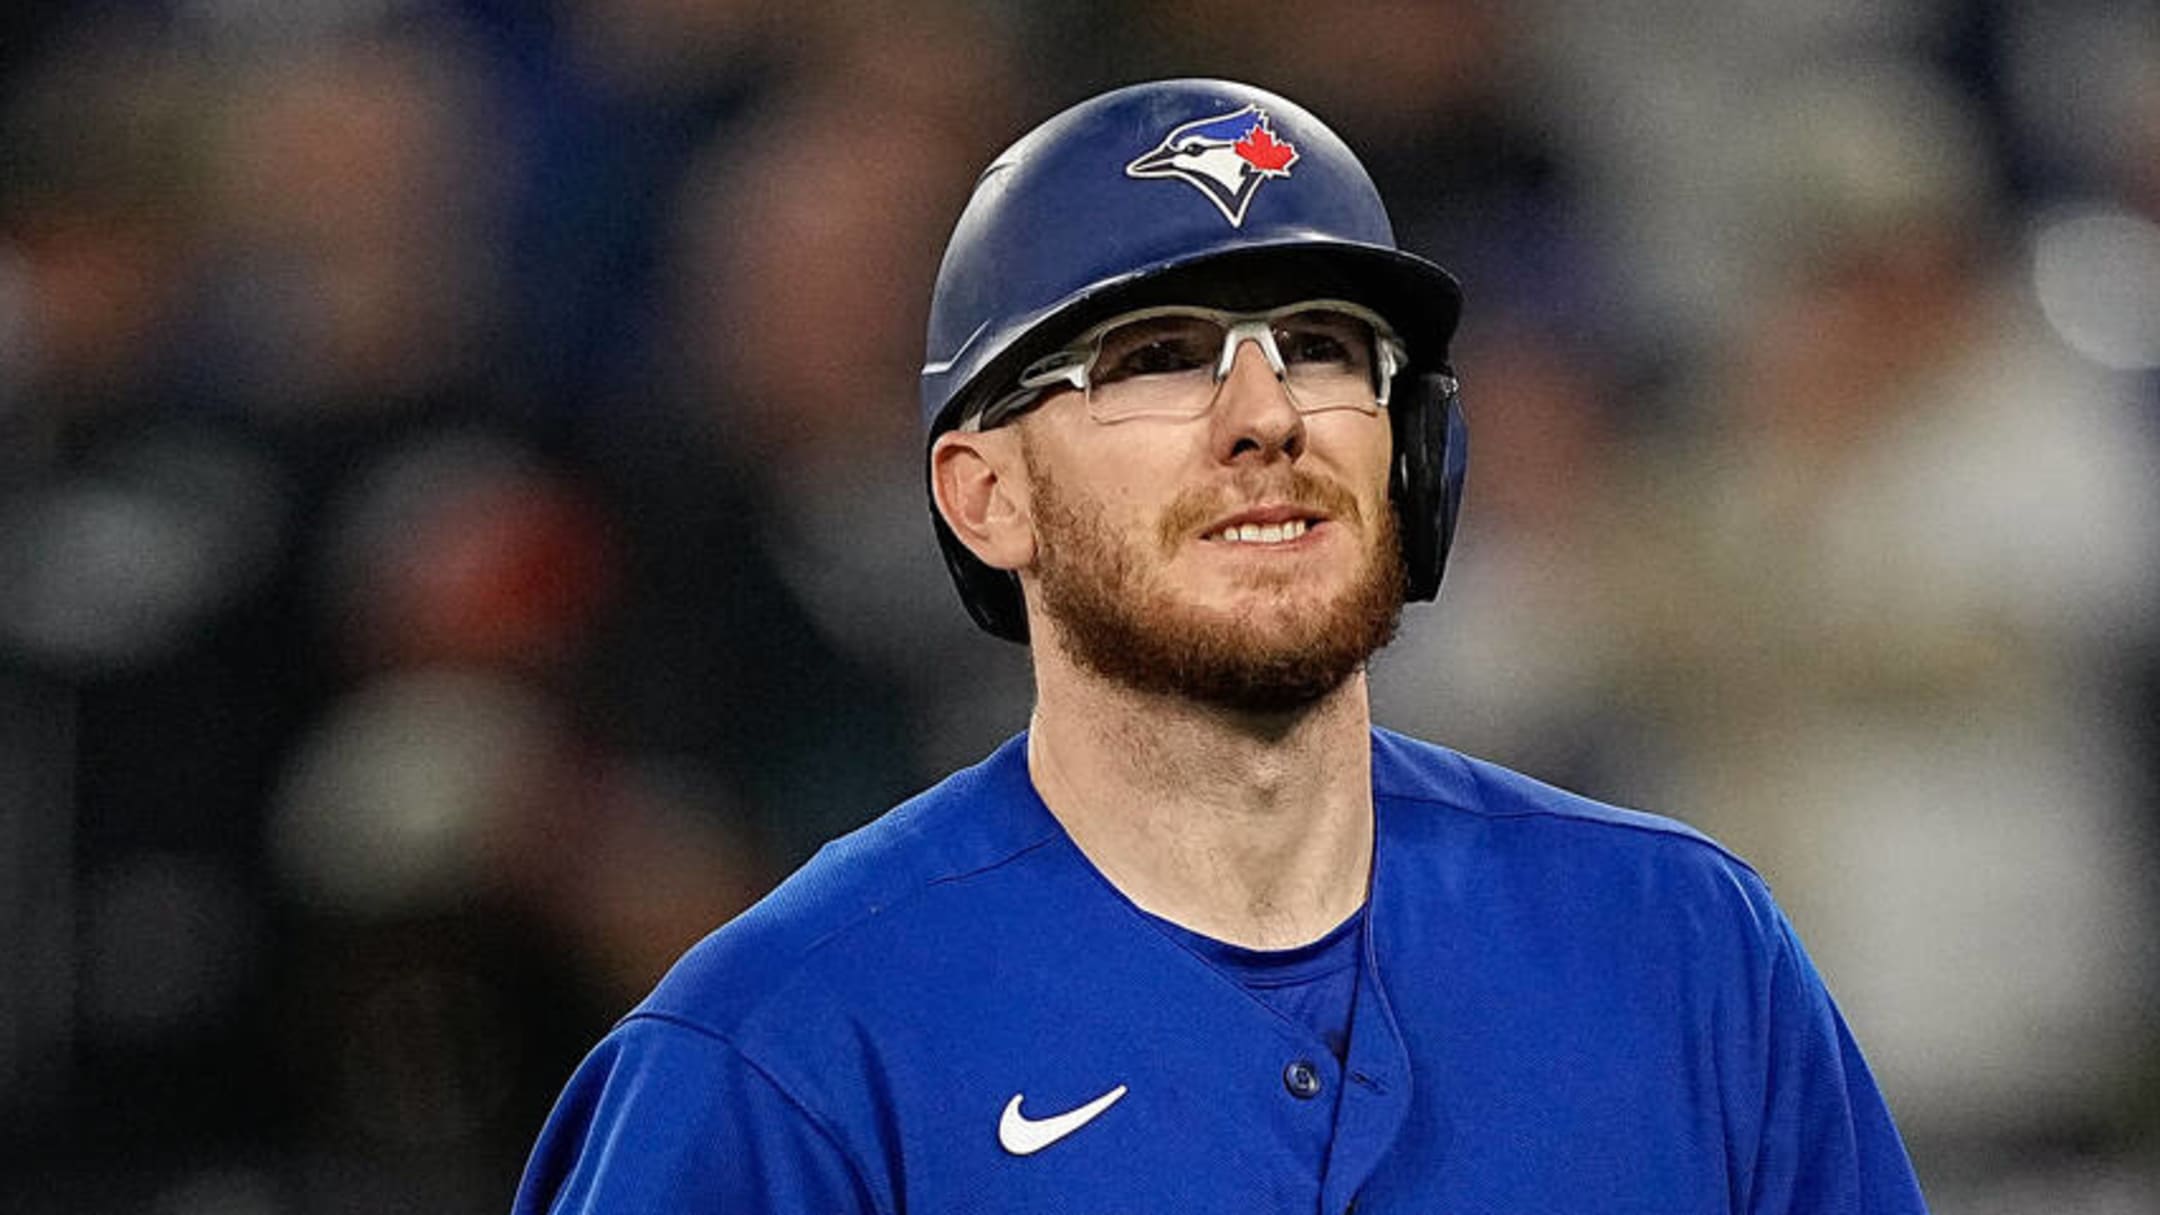 Toronto Blue Jays: Potential trade candidates on the roster